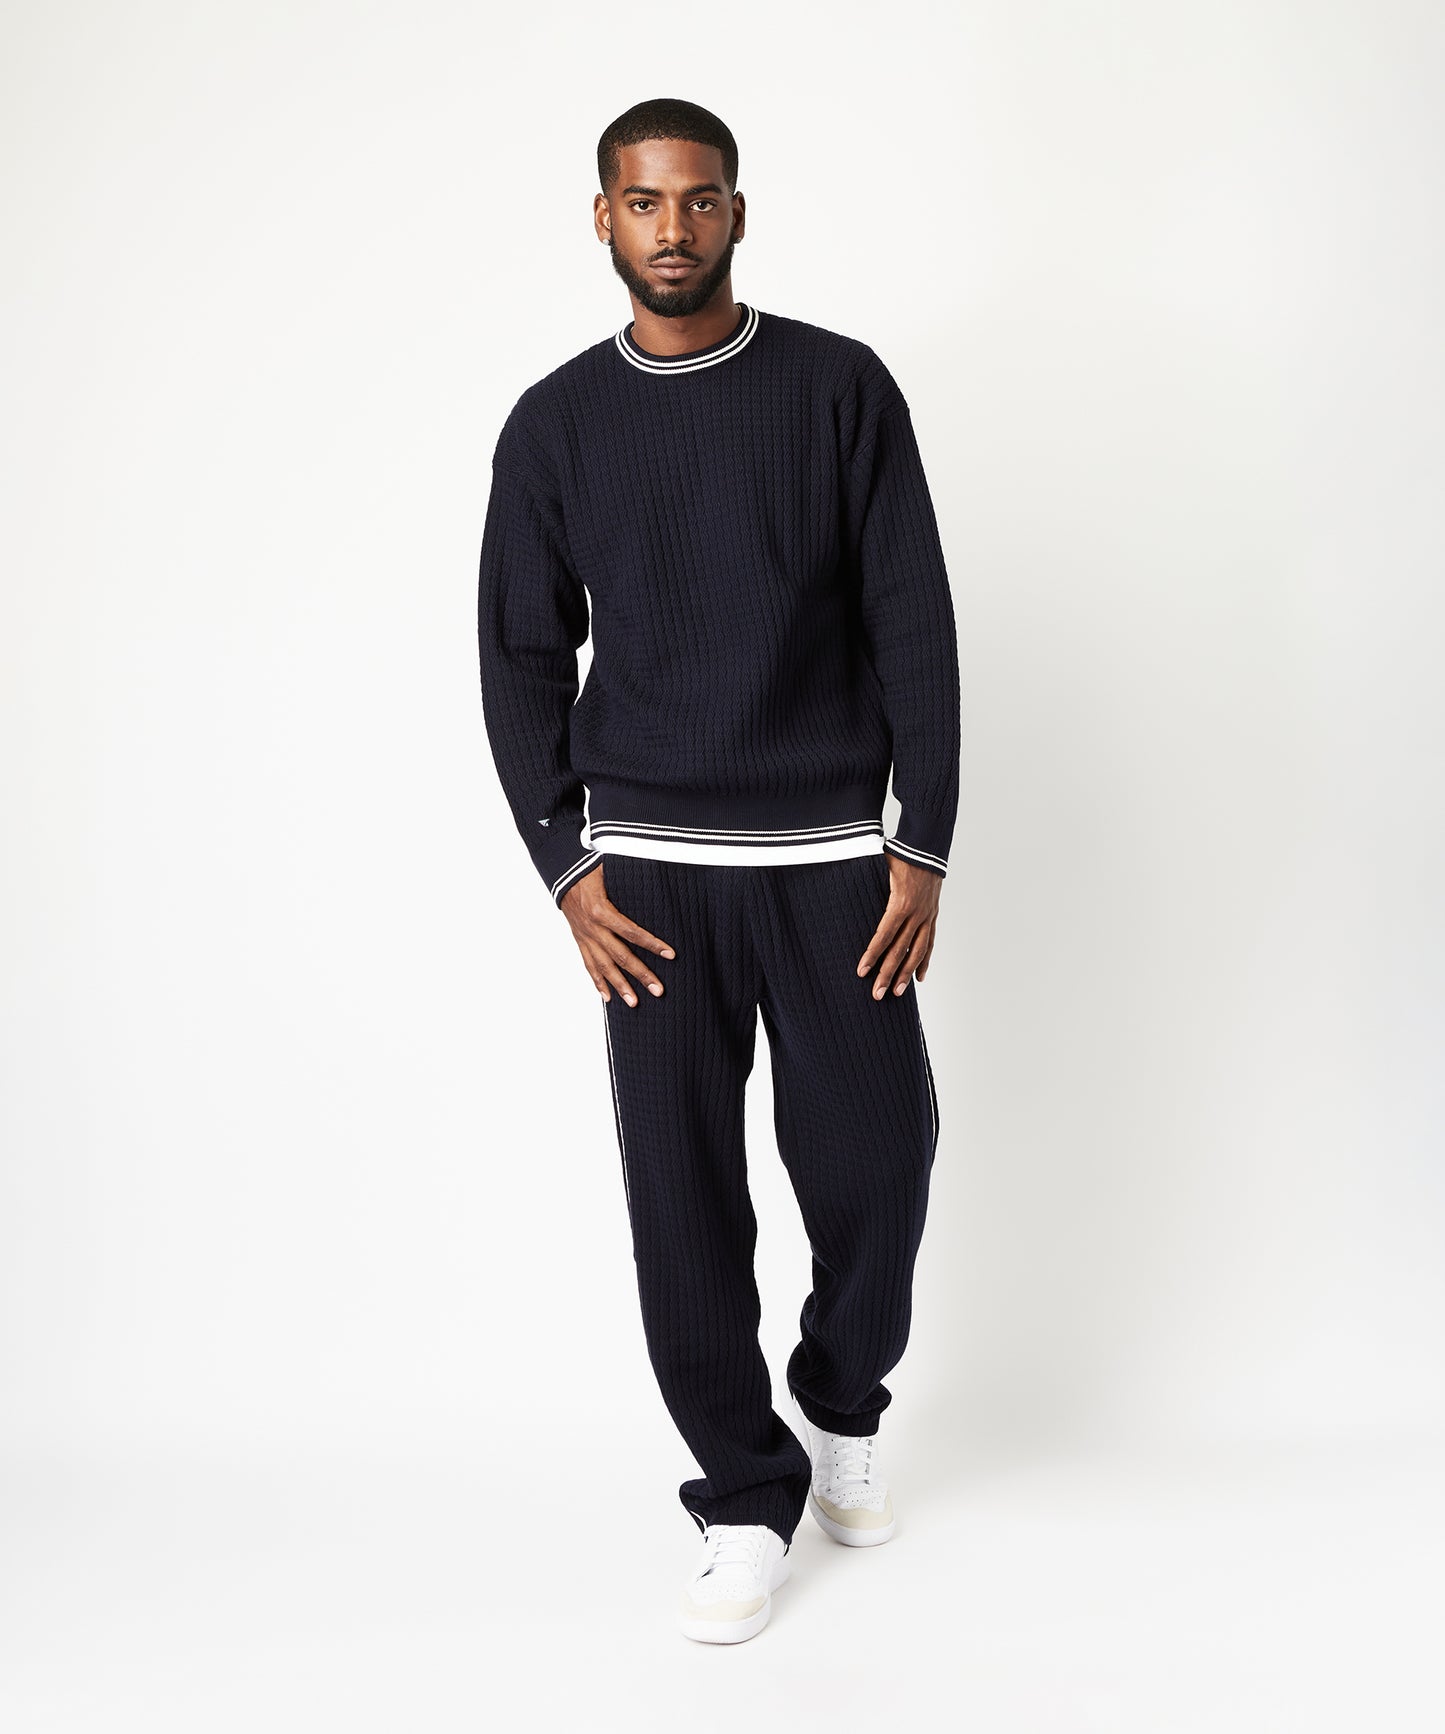 CUSTOM_ALT_TEXT: Male model wearing Paper Planes Racked Rib Sweater and Pant, color Parisian Night.